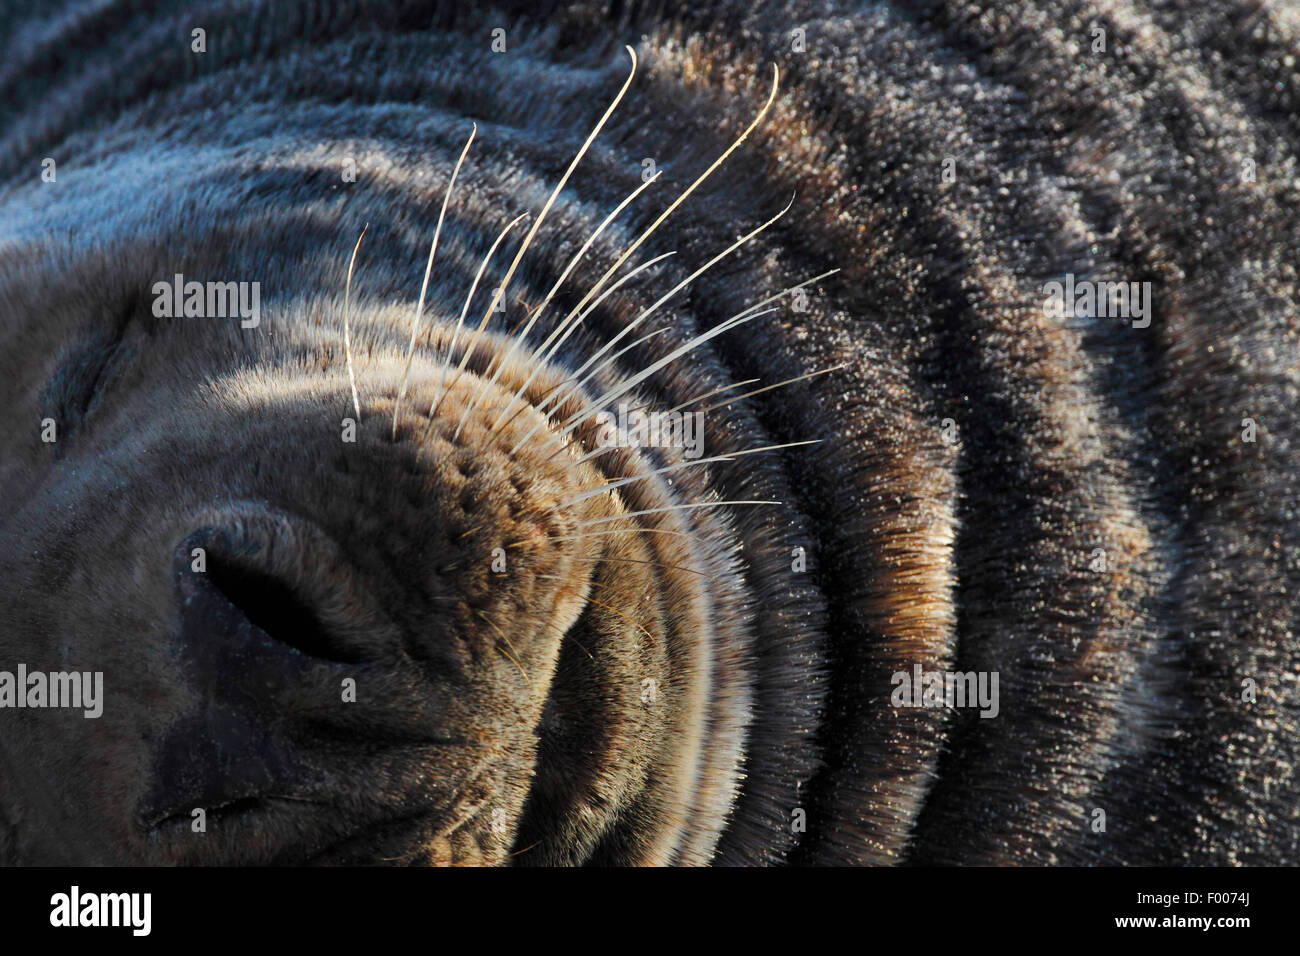 gray seal (Halichoerus grypus), snout with whiskers, Germany, Schleswig-Holstein, Heligoland Stock Photo